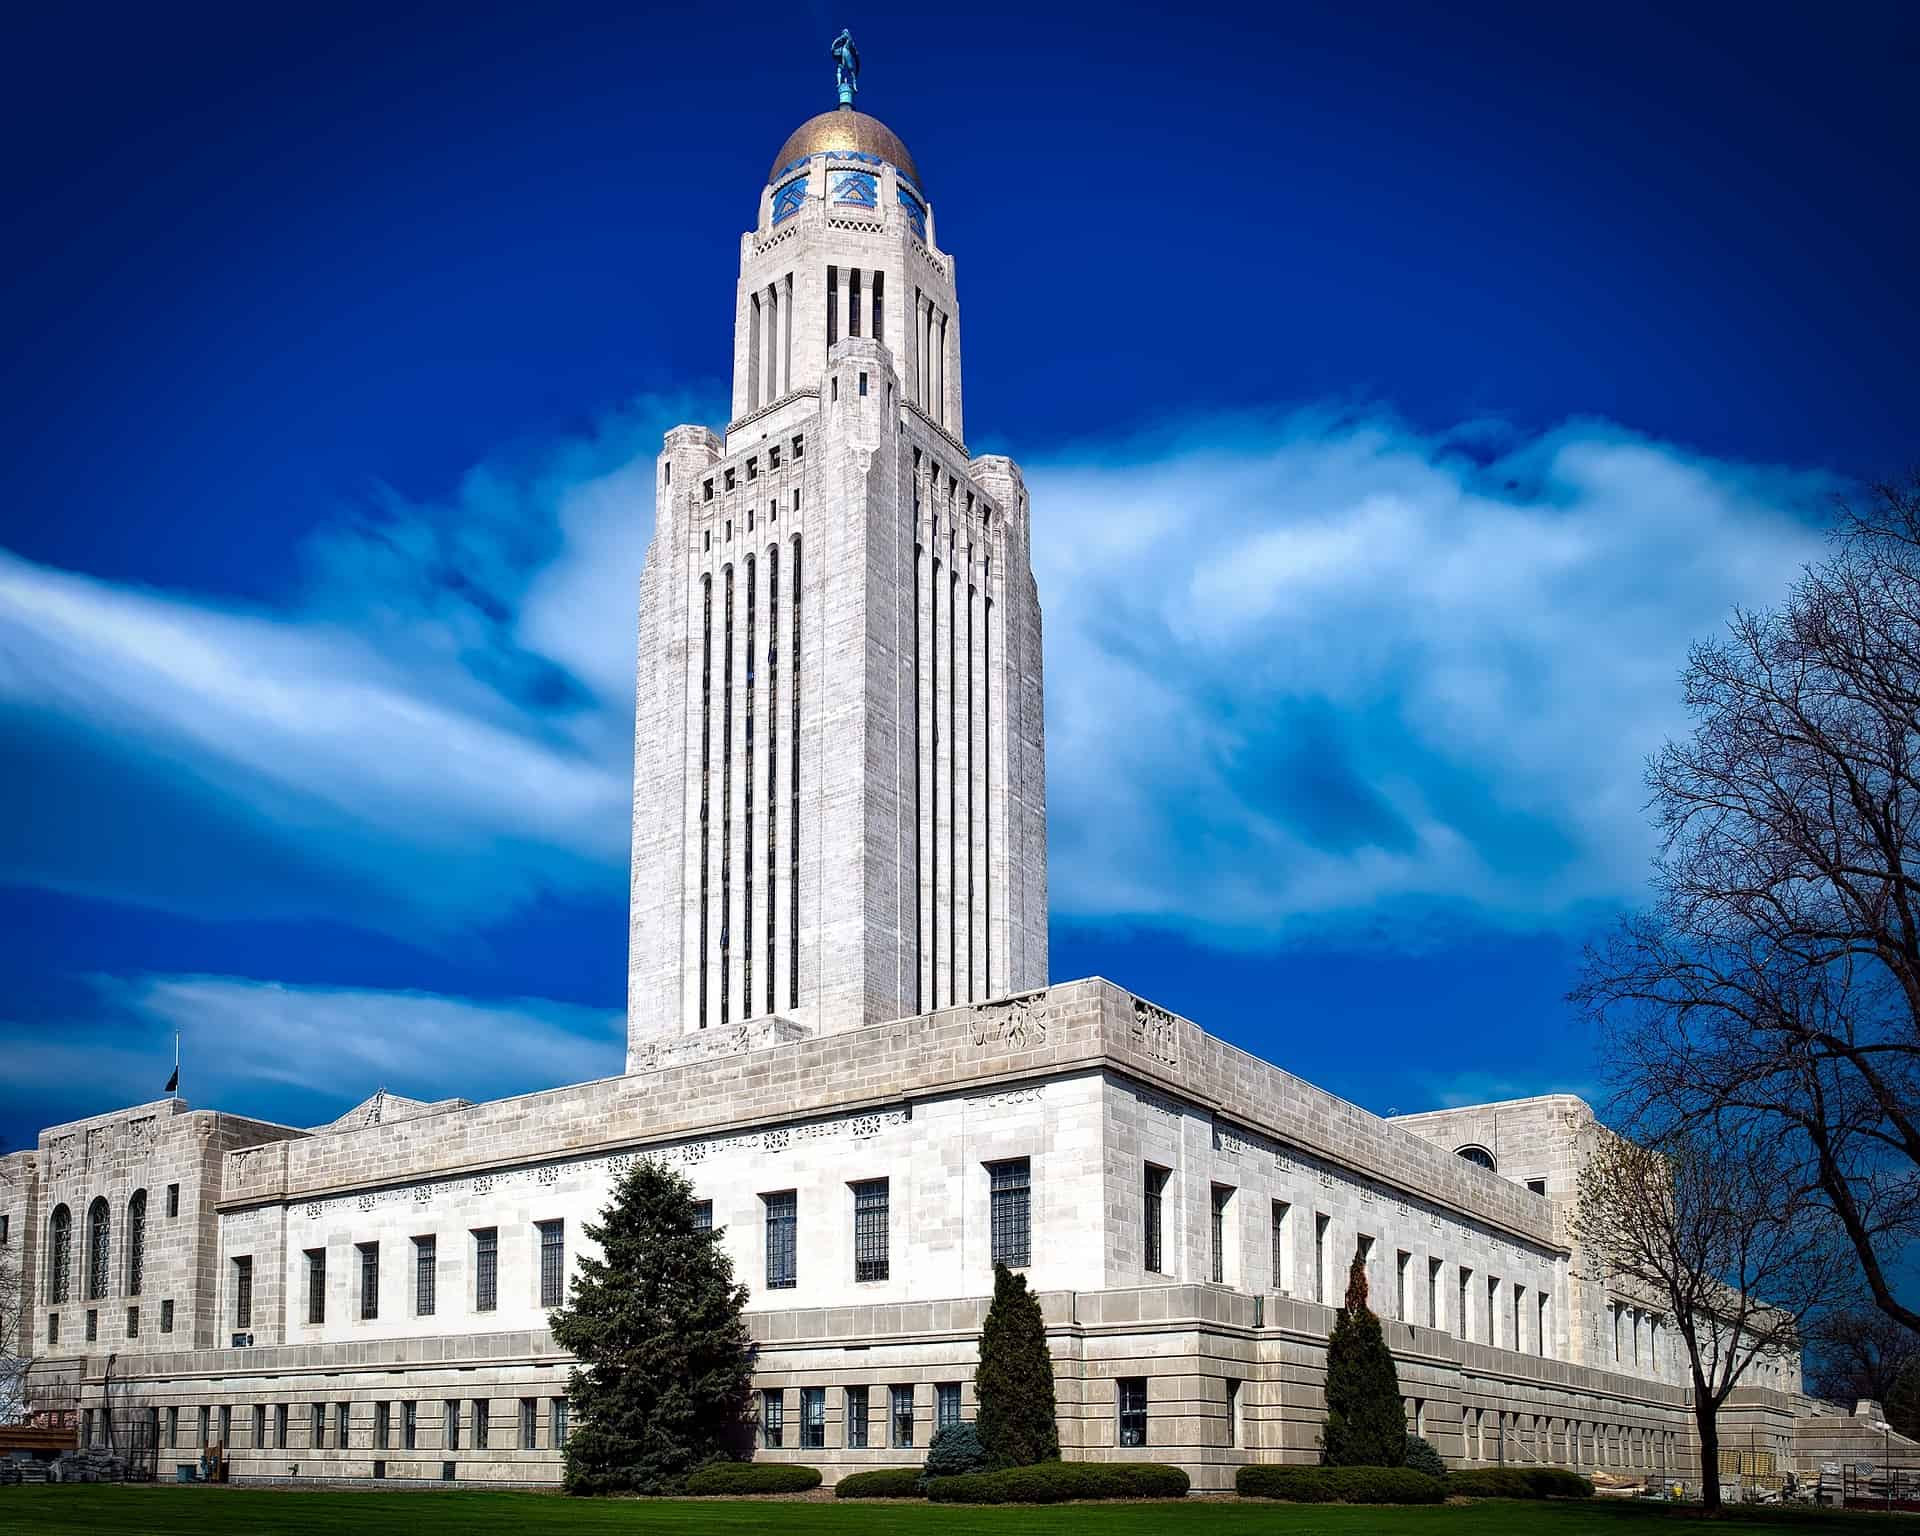 Best things to do in Lincoln Nebraska - Allea Grummert - Capitol Building by David Mark on Pixabay